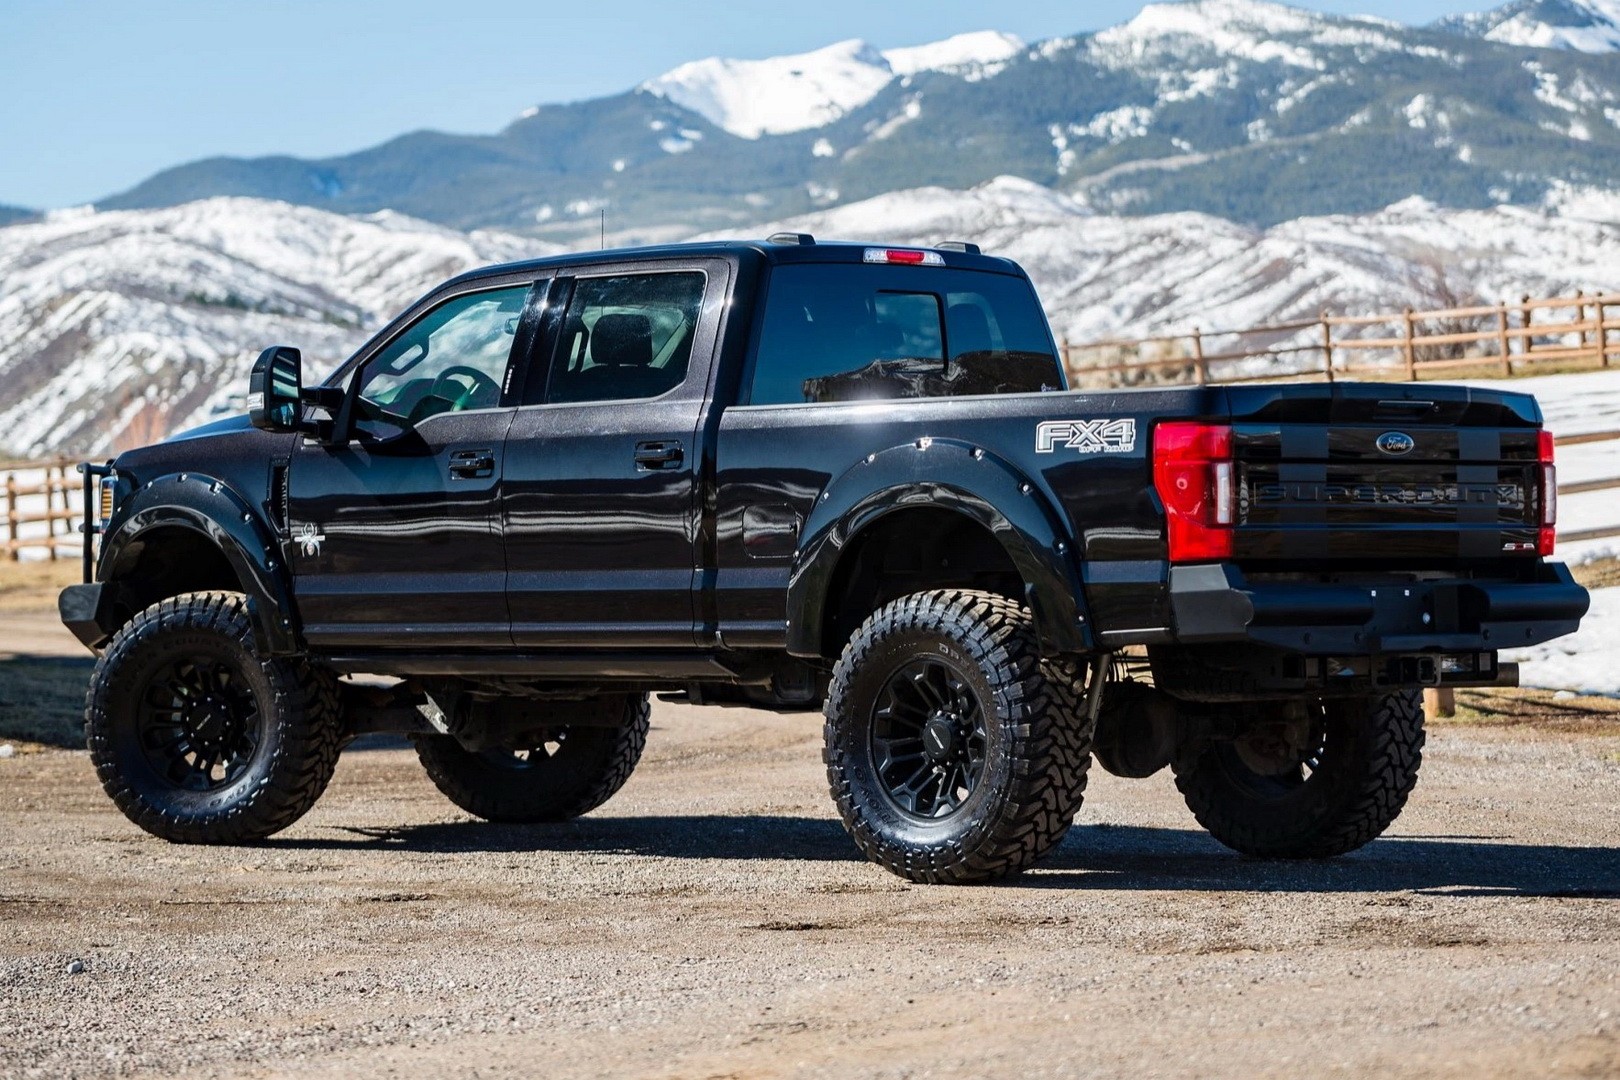 2020 Ford F250 Super Duty Black Widow Is a WorldConquering Mega Truck